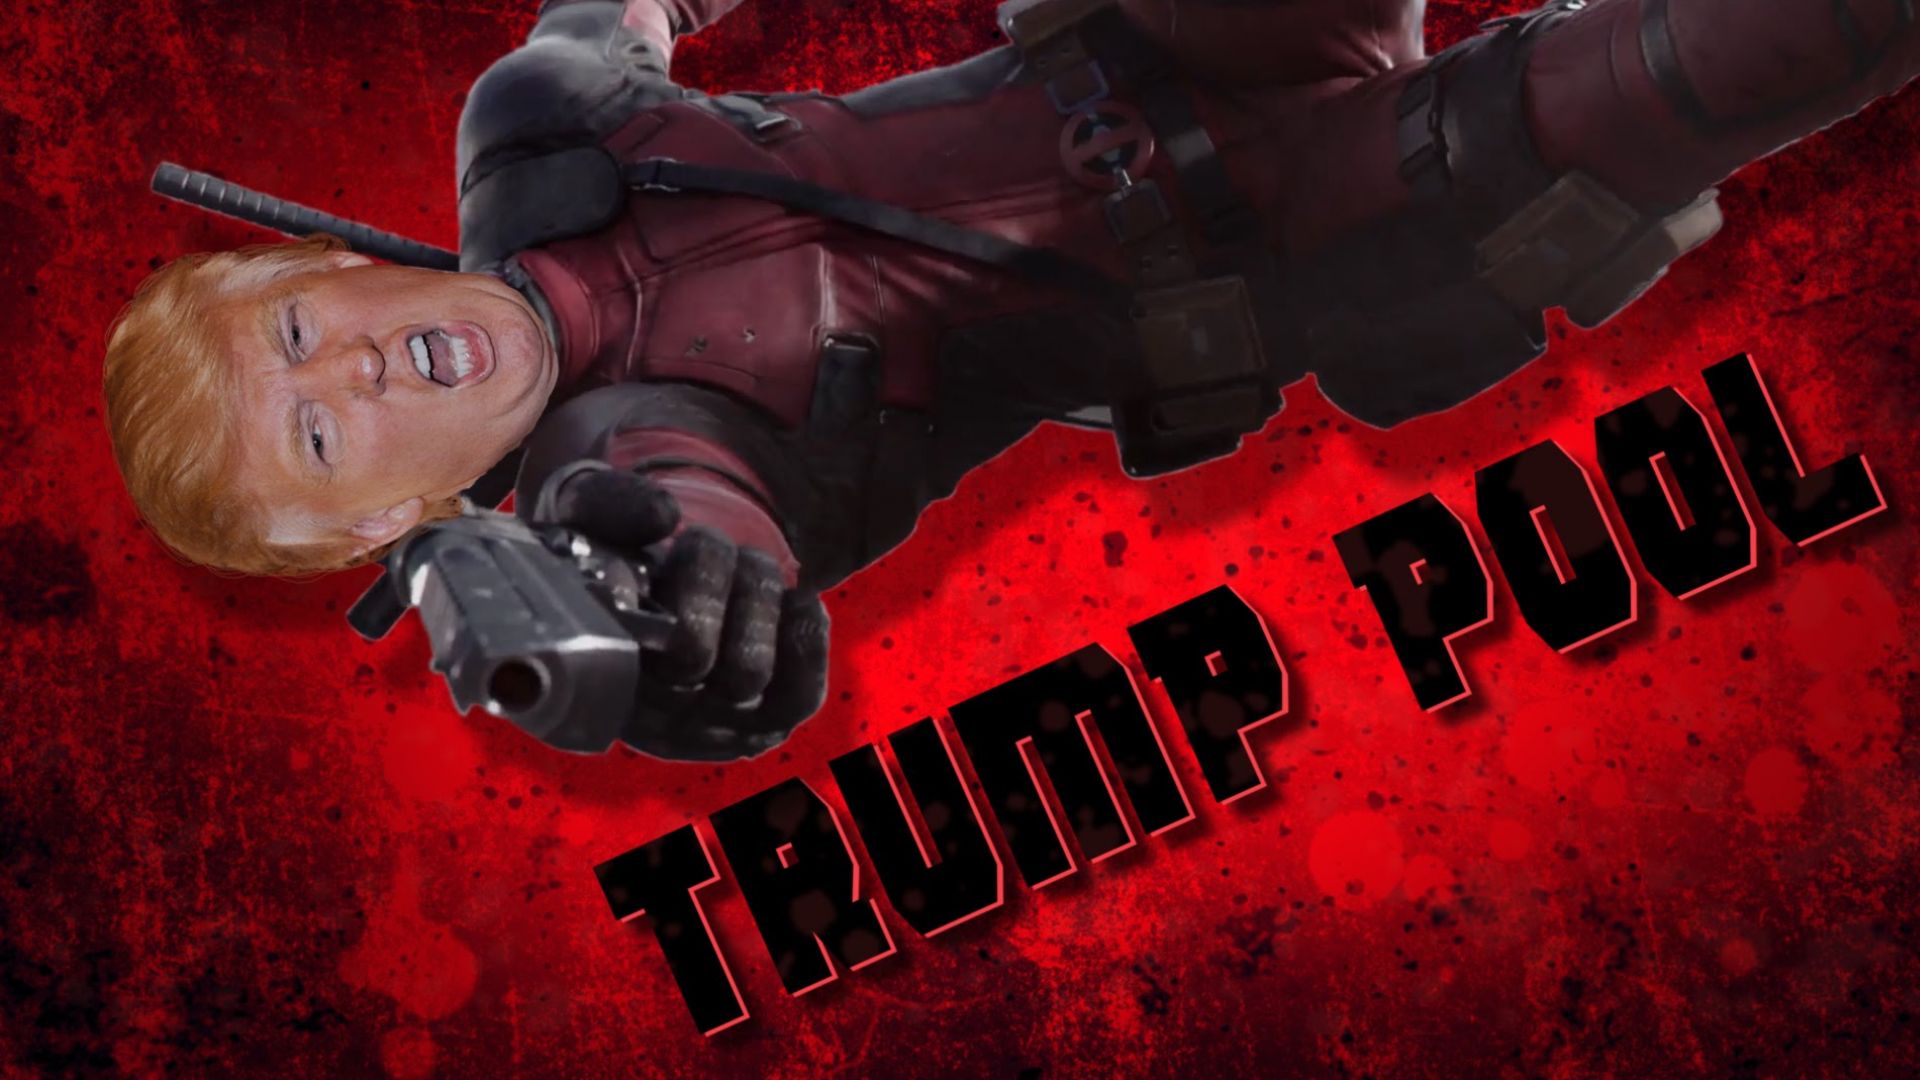 Donald Trump is Deadpool in the latest mash-up.